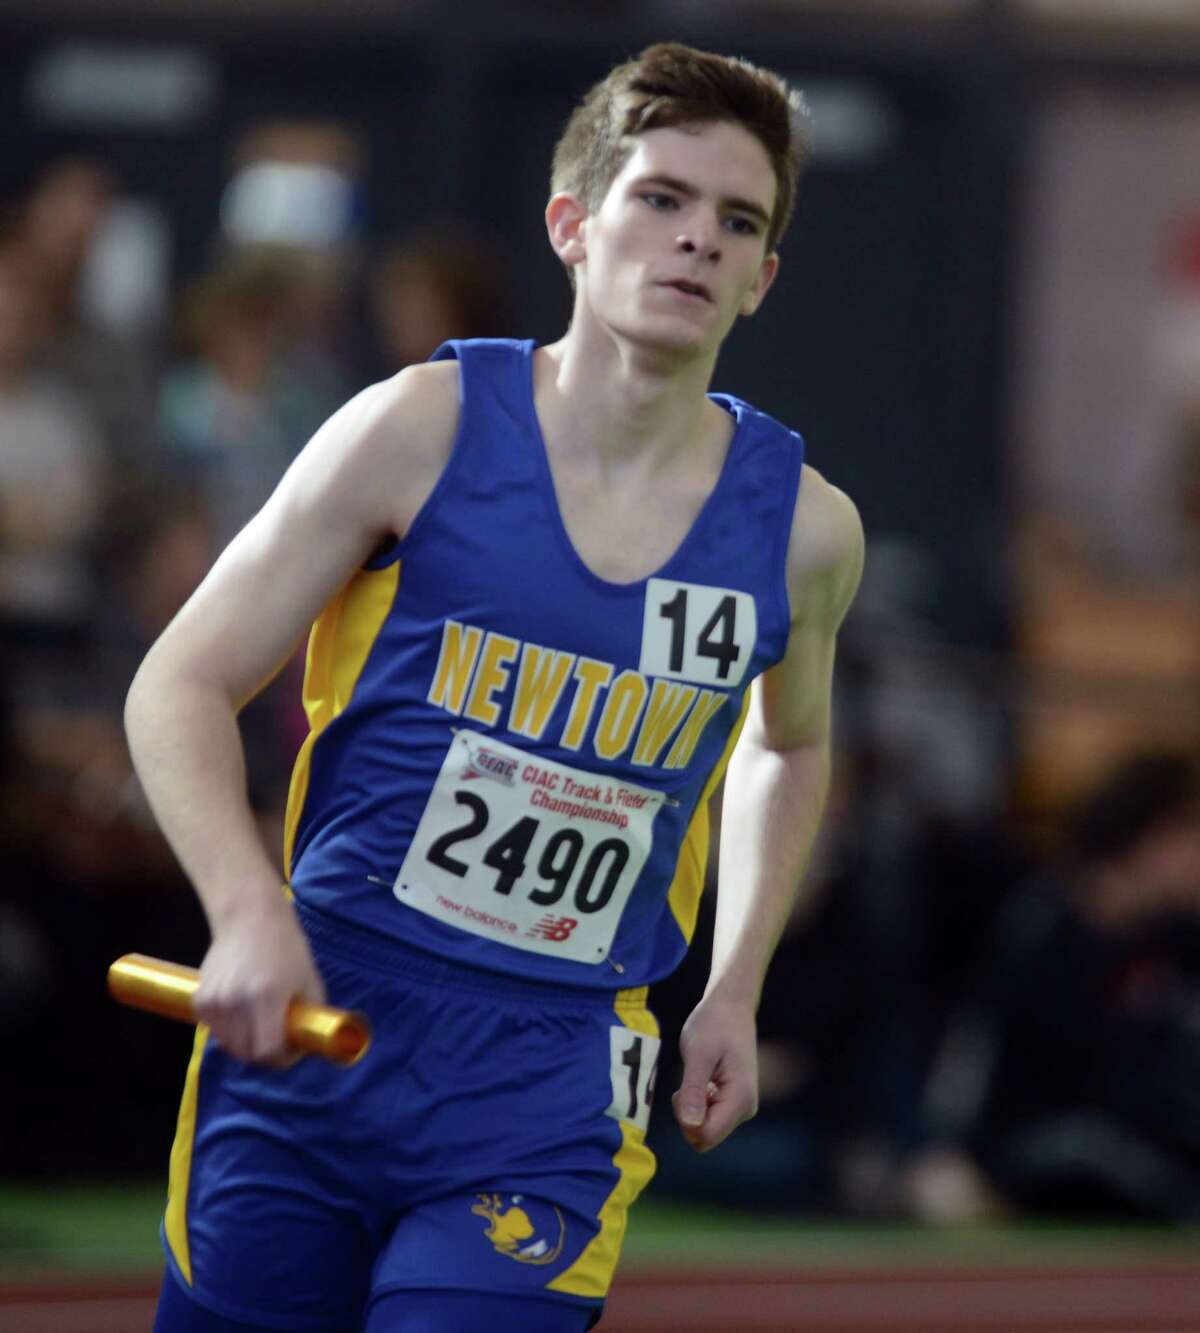 Newtown's Nick Swenson competes in the 4x800 meter relay Saturday, Feb. 8, 2014, during the CIAC Class LL Boys and Girls track championships at the Floyd Little Athletic Center in New Haven, Conn.